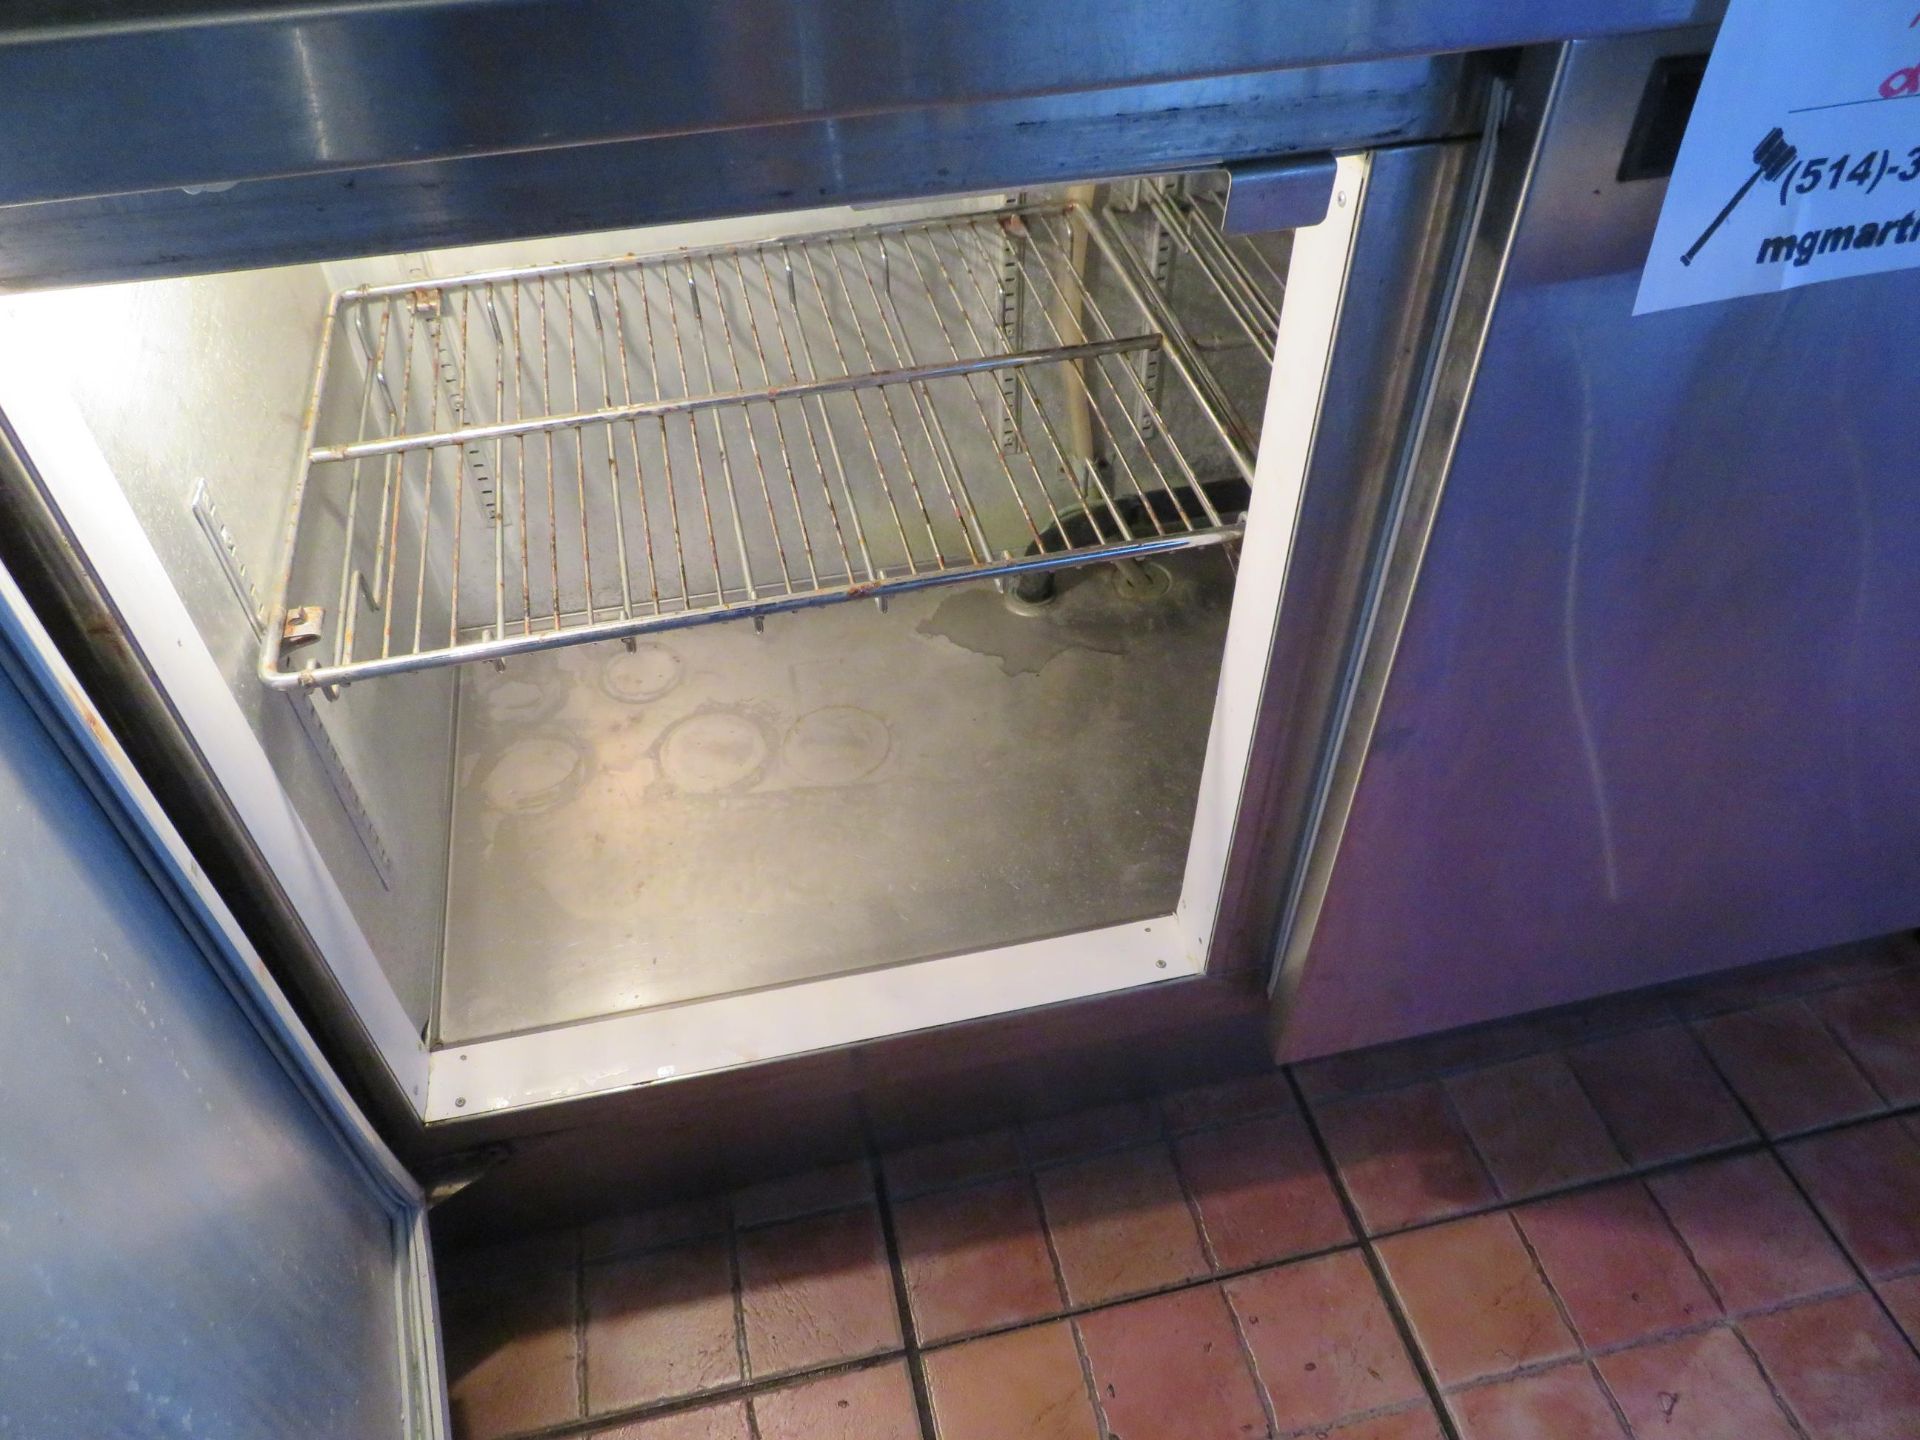 Stainless steel 2 door refrigerator approx. 48"w x 24"d x 36"h - Image 2 of 2